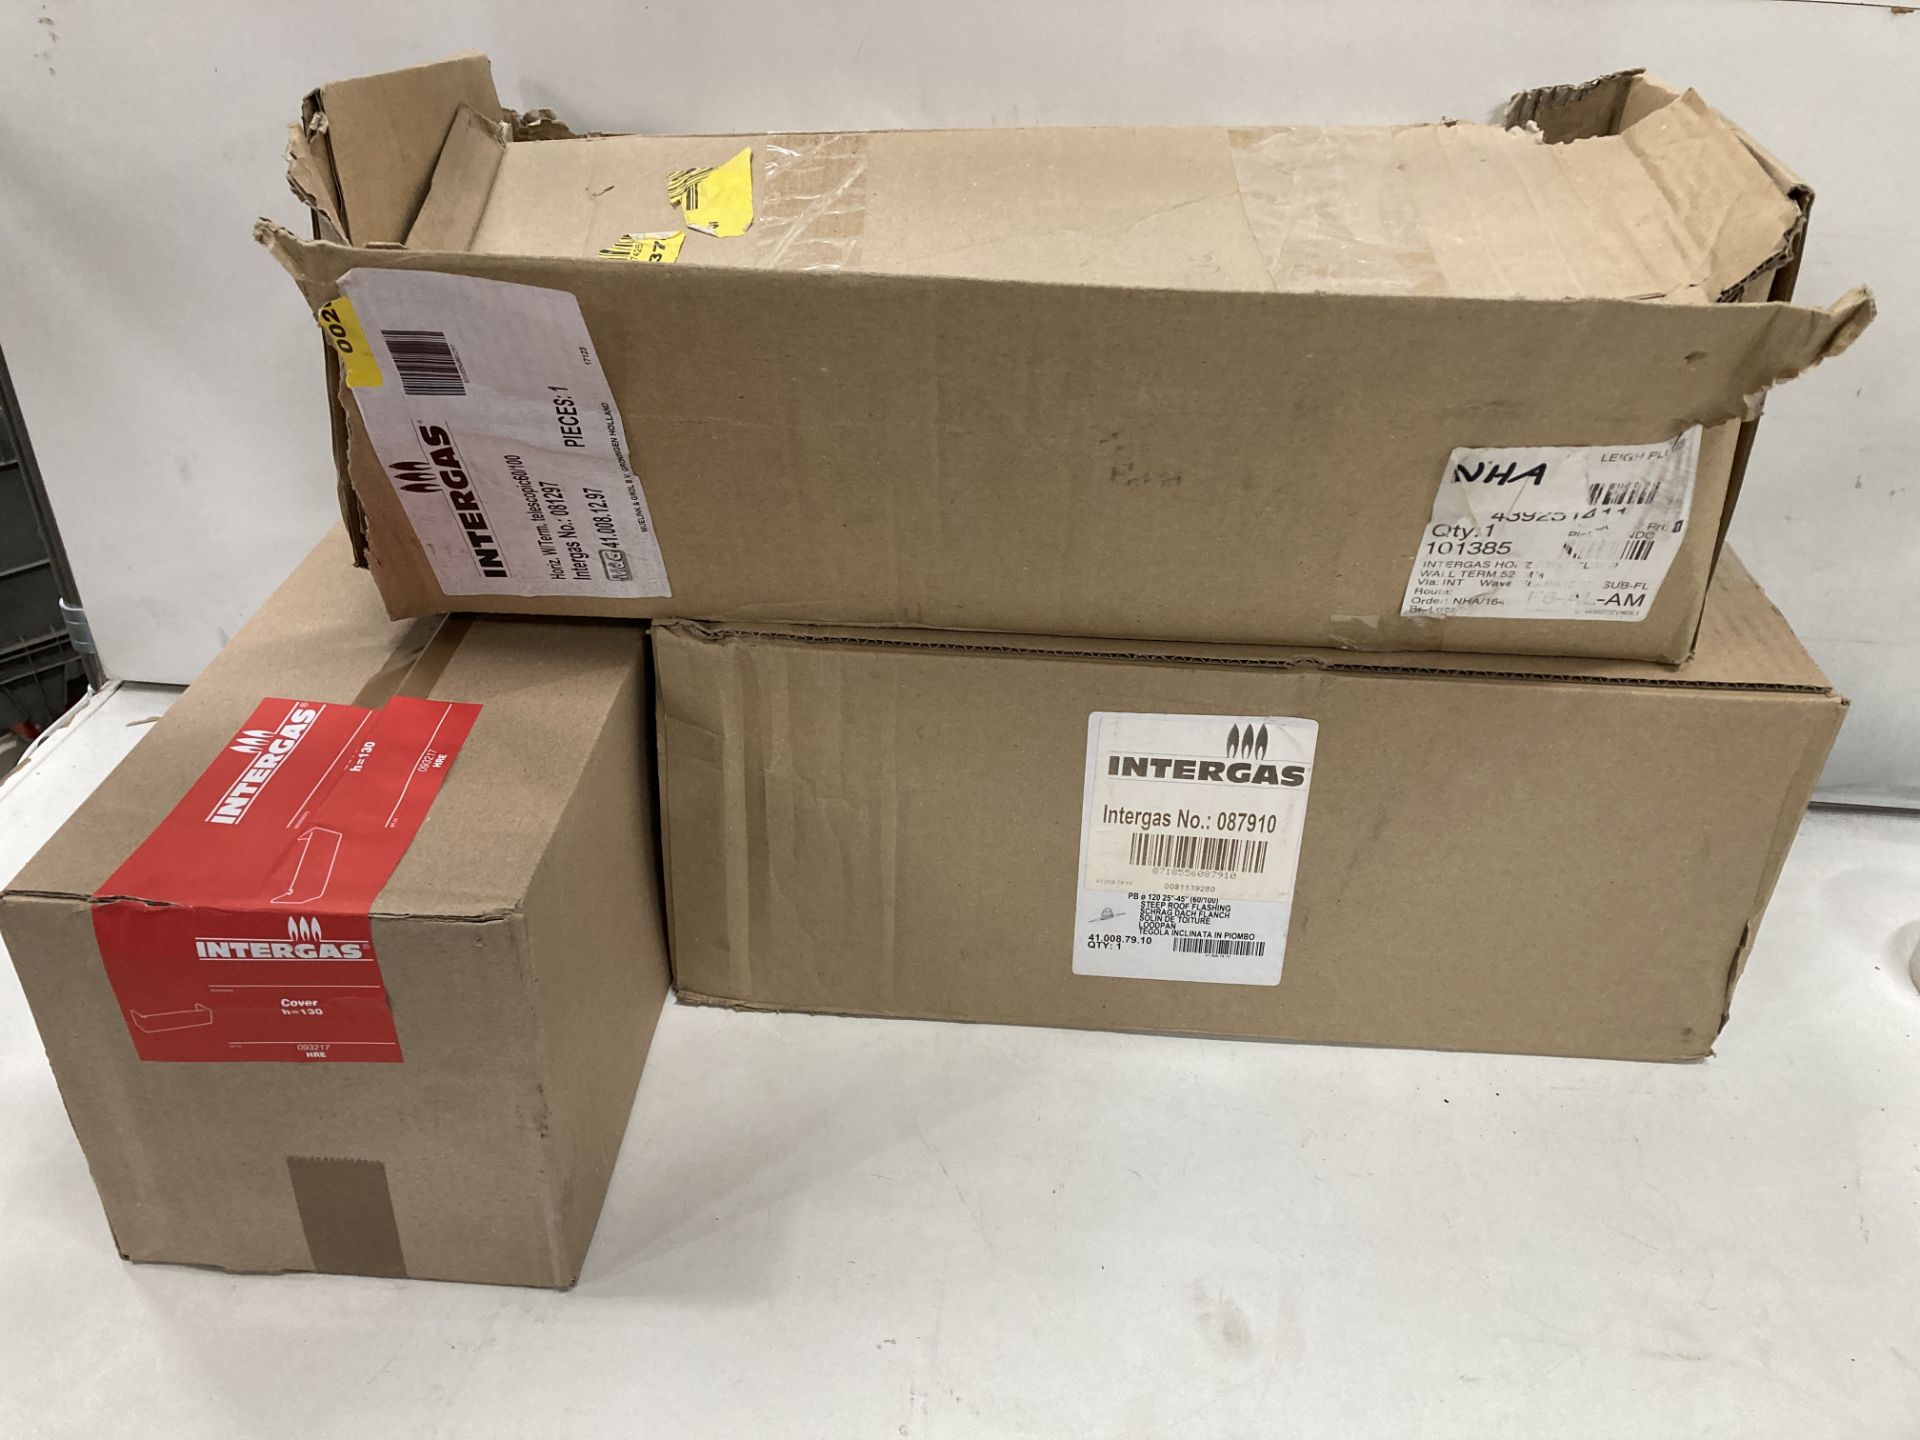 3 x Intergas Spare Parts As Listed